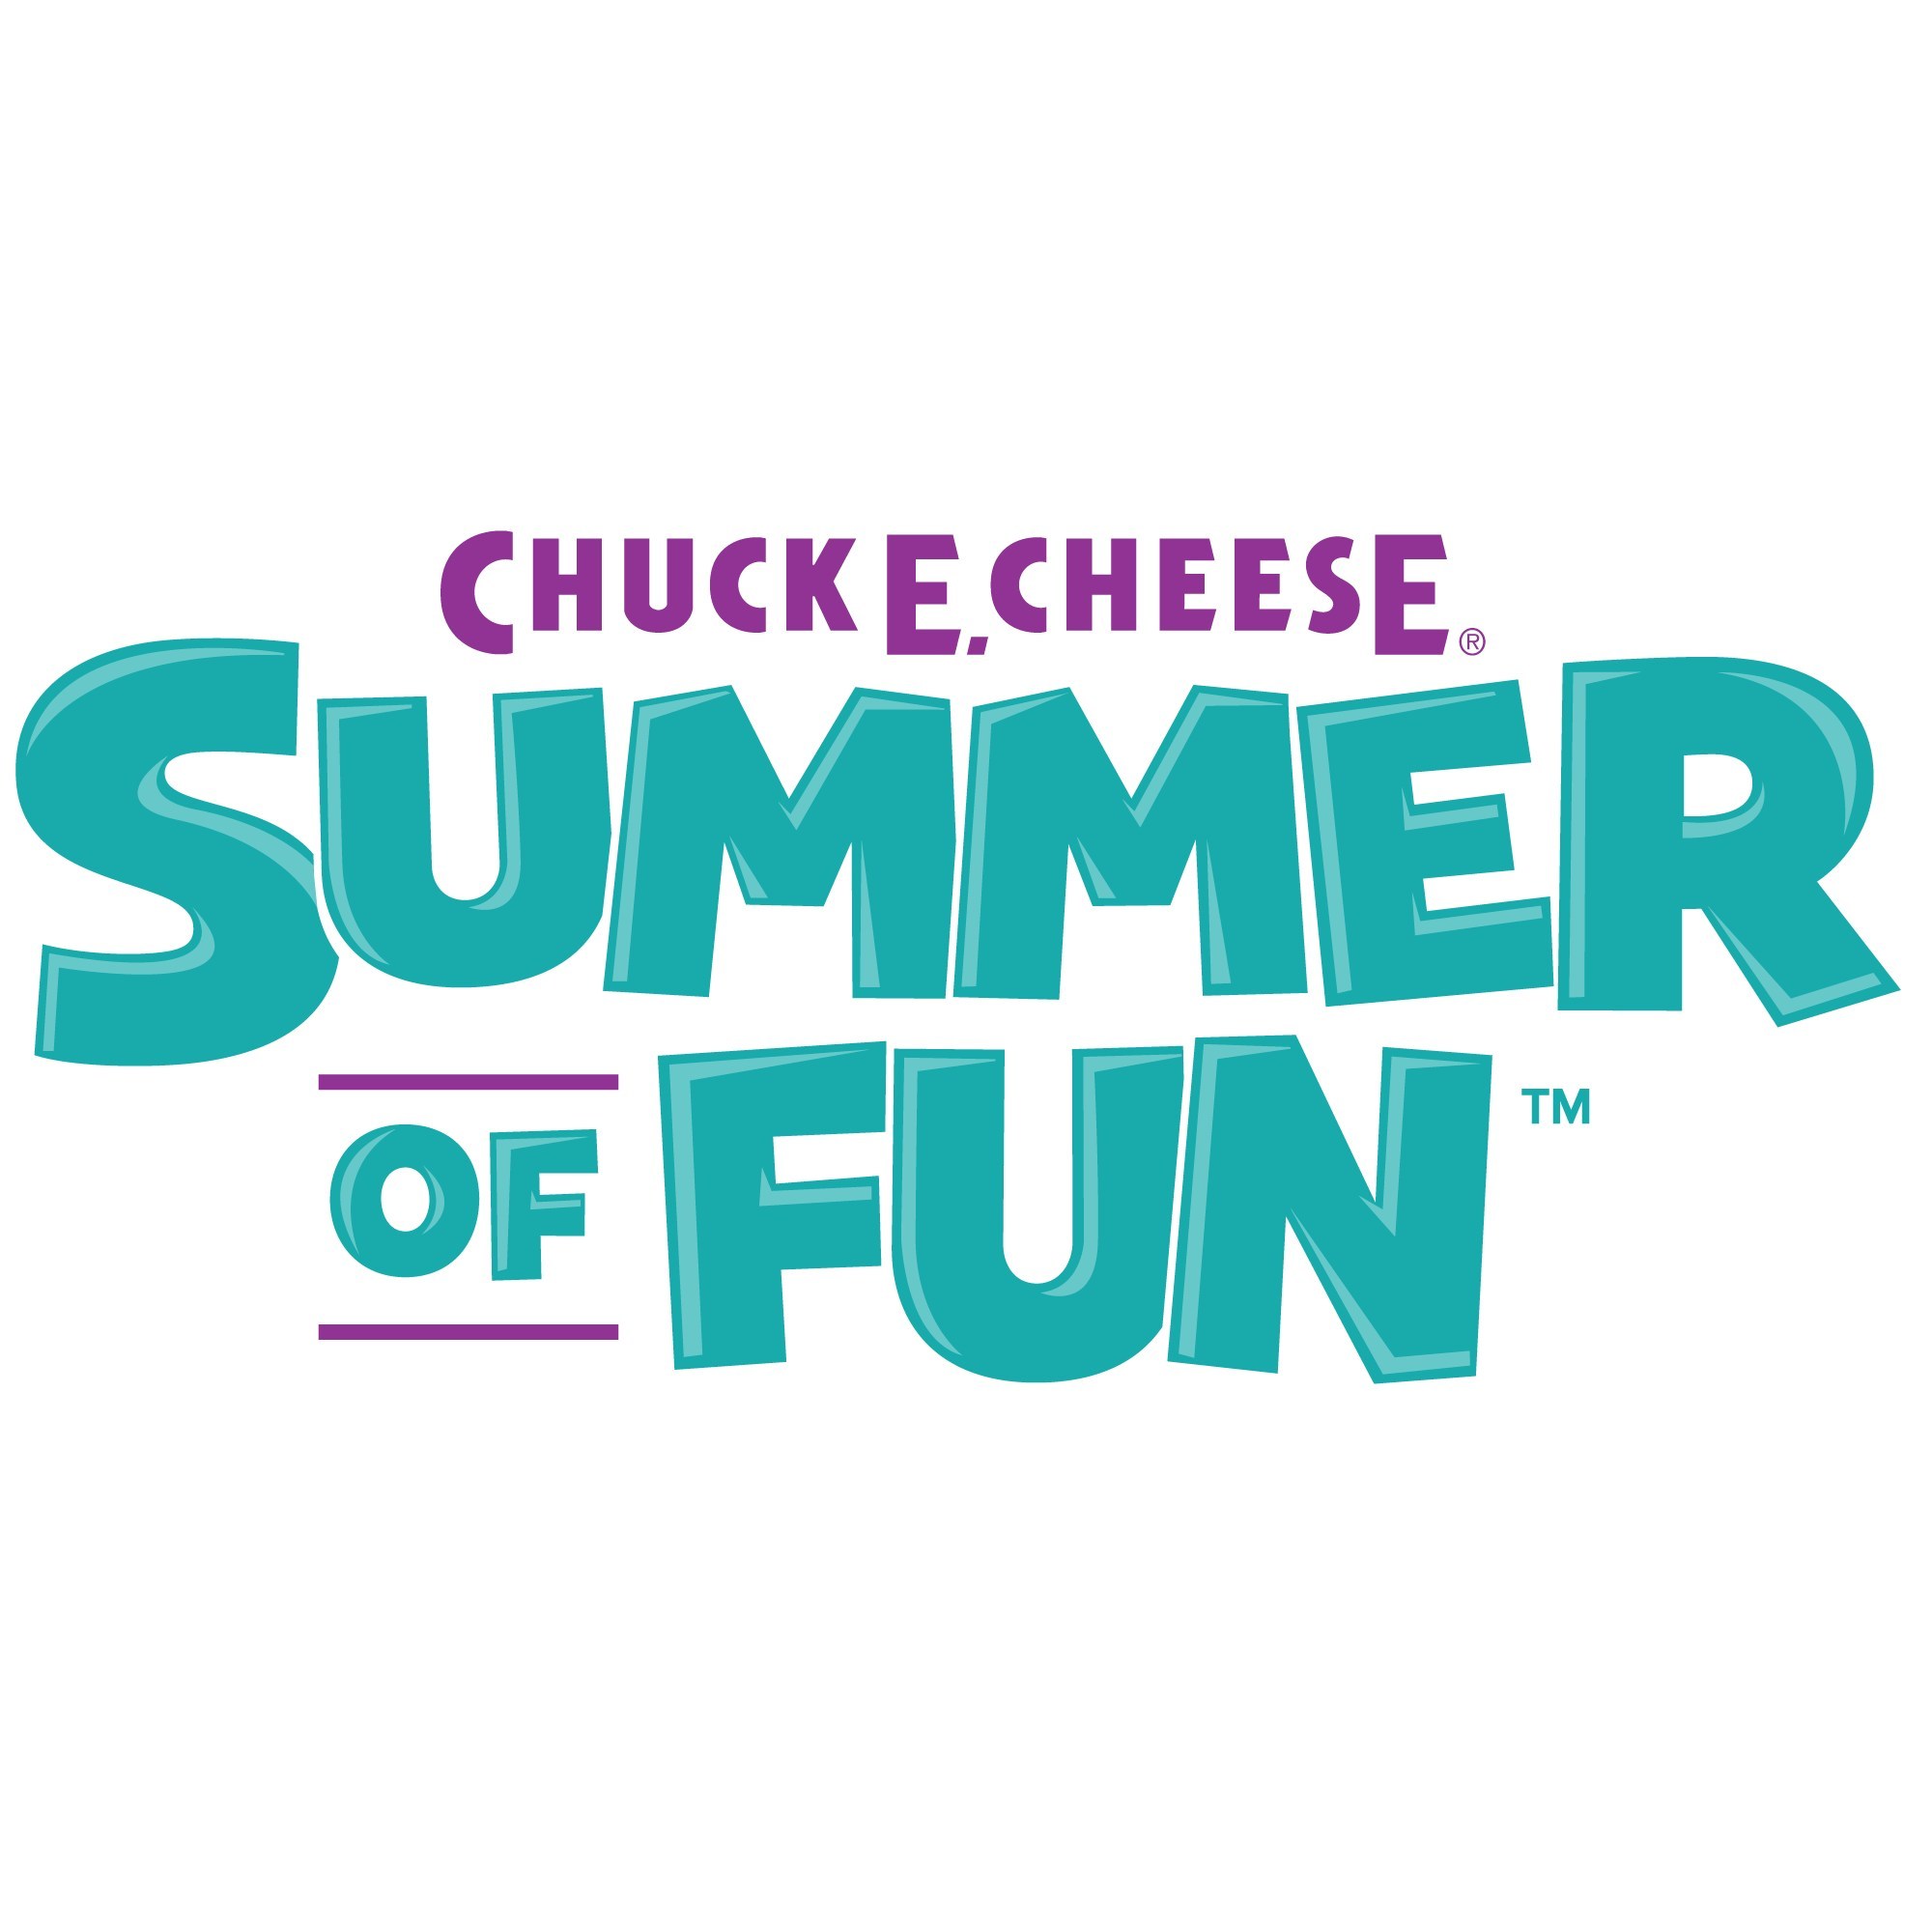 CHUCK E. CHEESE INTRODUCES BEST VALUE WITH NEW SUMMER PASS AND 12-WEEK SUMMER OF FUN NATIONAL CELEBRATION (PRNewsfoto/CEC Entertainment, LLC)